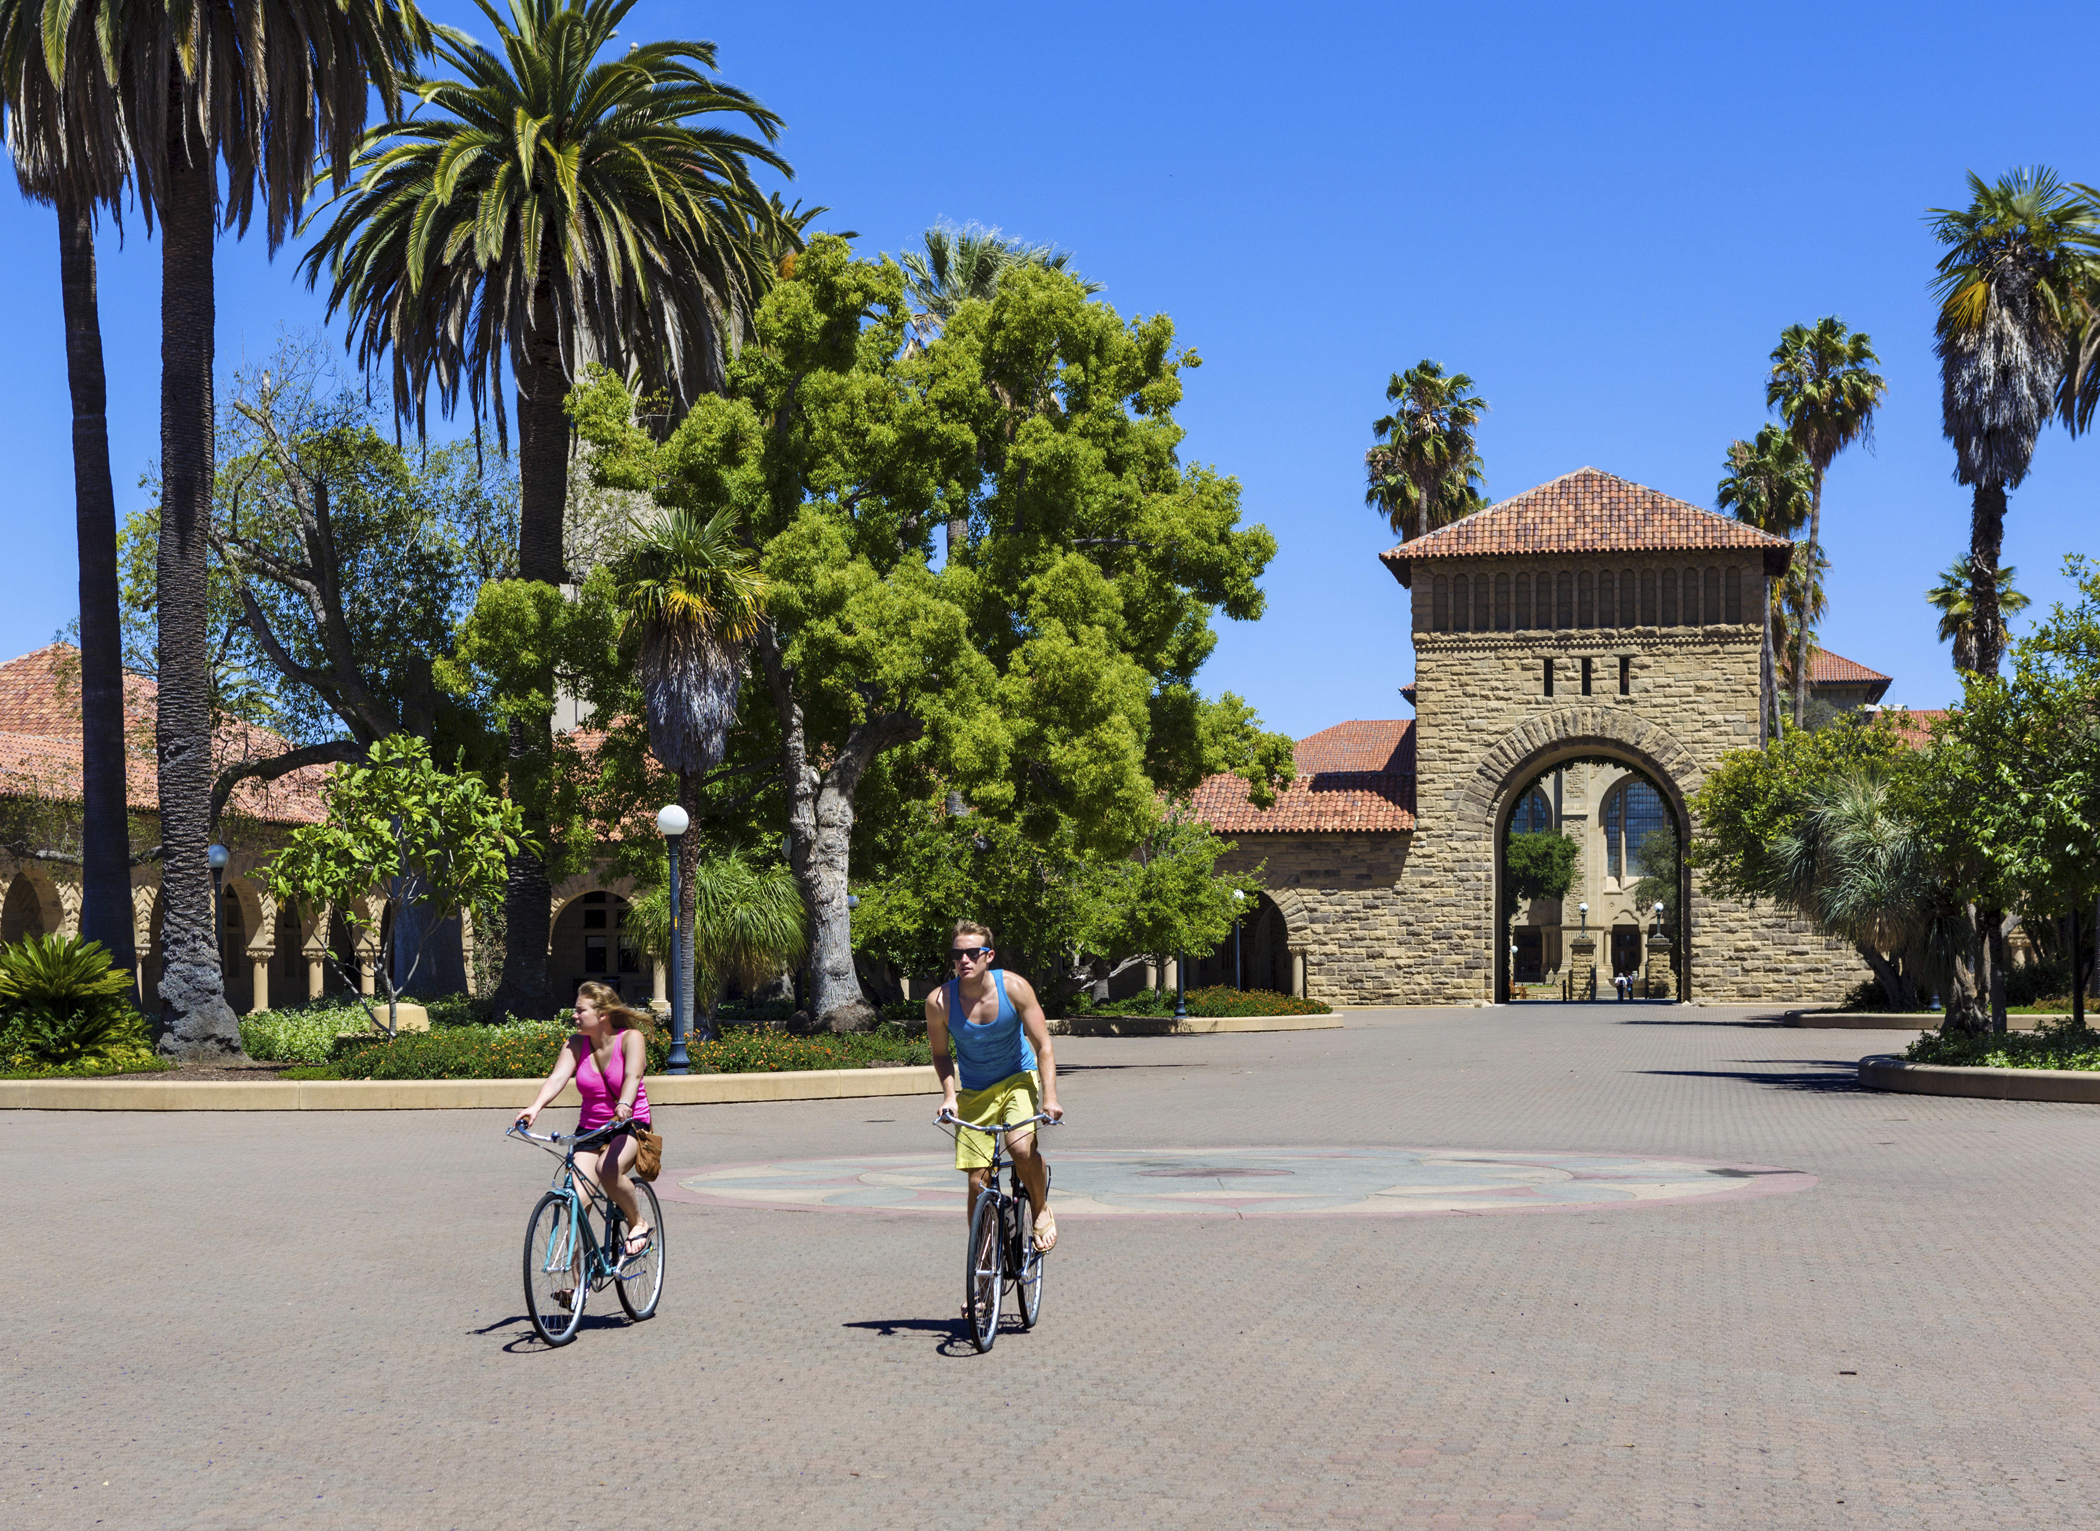 20 Best Colleges: Our List vs. That Other One